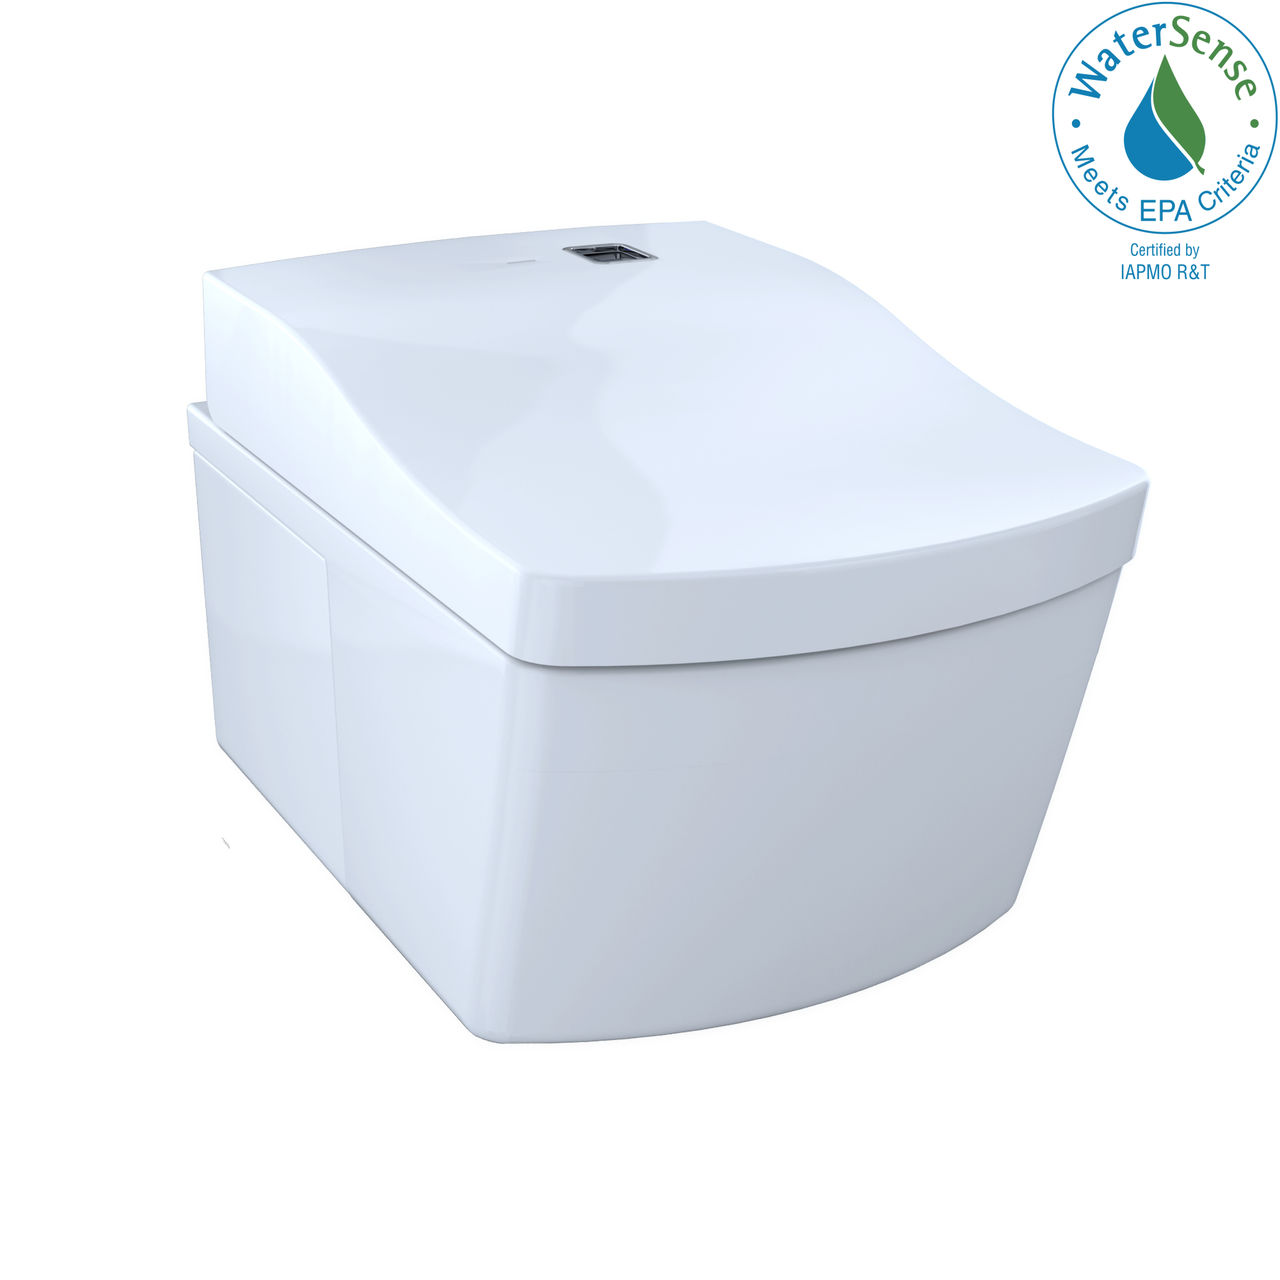 TOTO NEOREST EW Dual Flush 1.28 or 0.9 GPF Wall-Hung Toilet with Integrated Bidet Seat and eWater+,  - CWT994CEMFG#01 - BNGBath